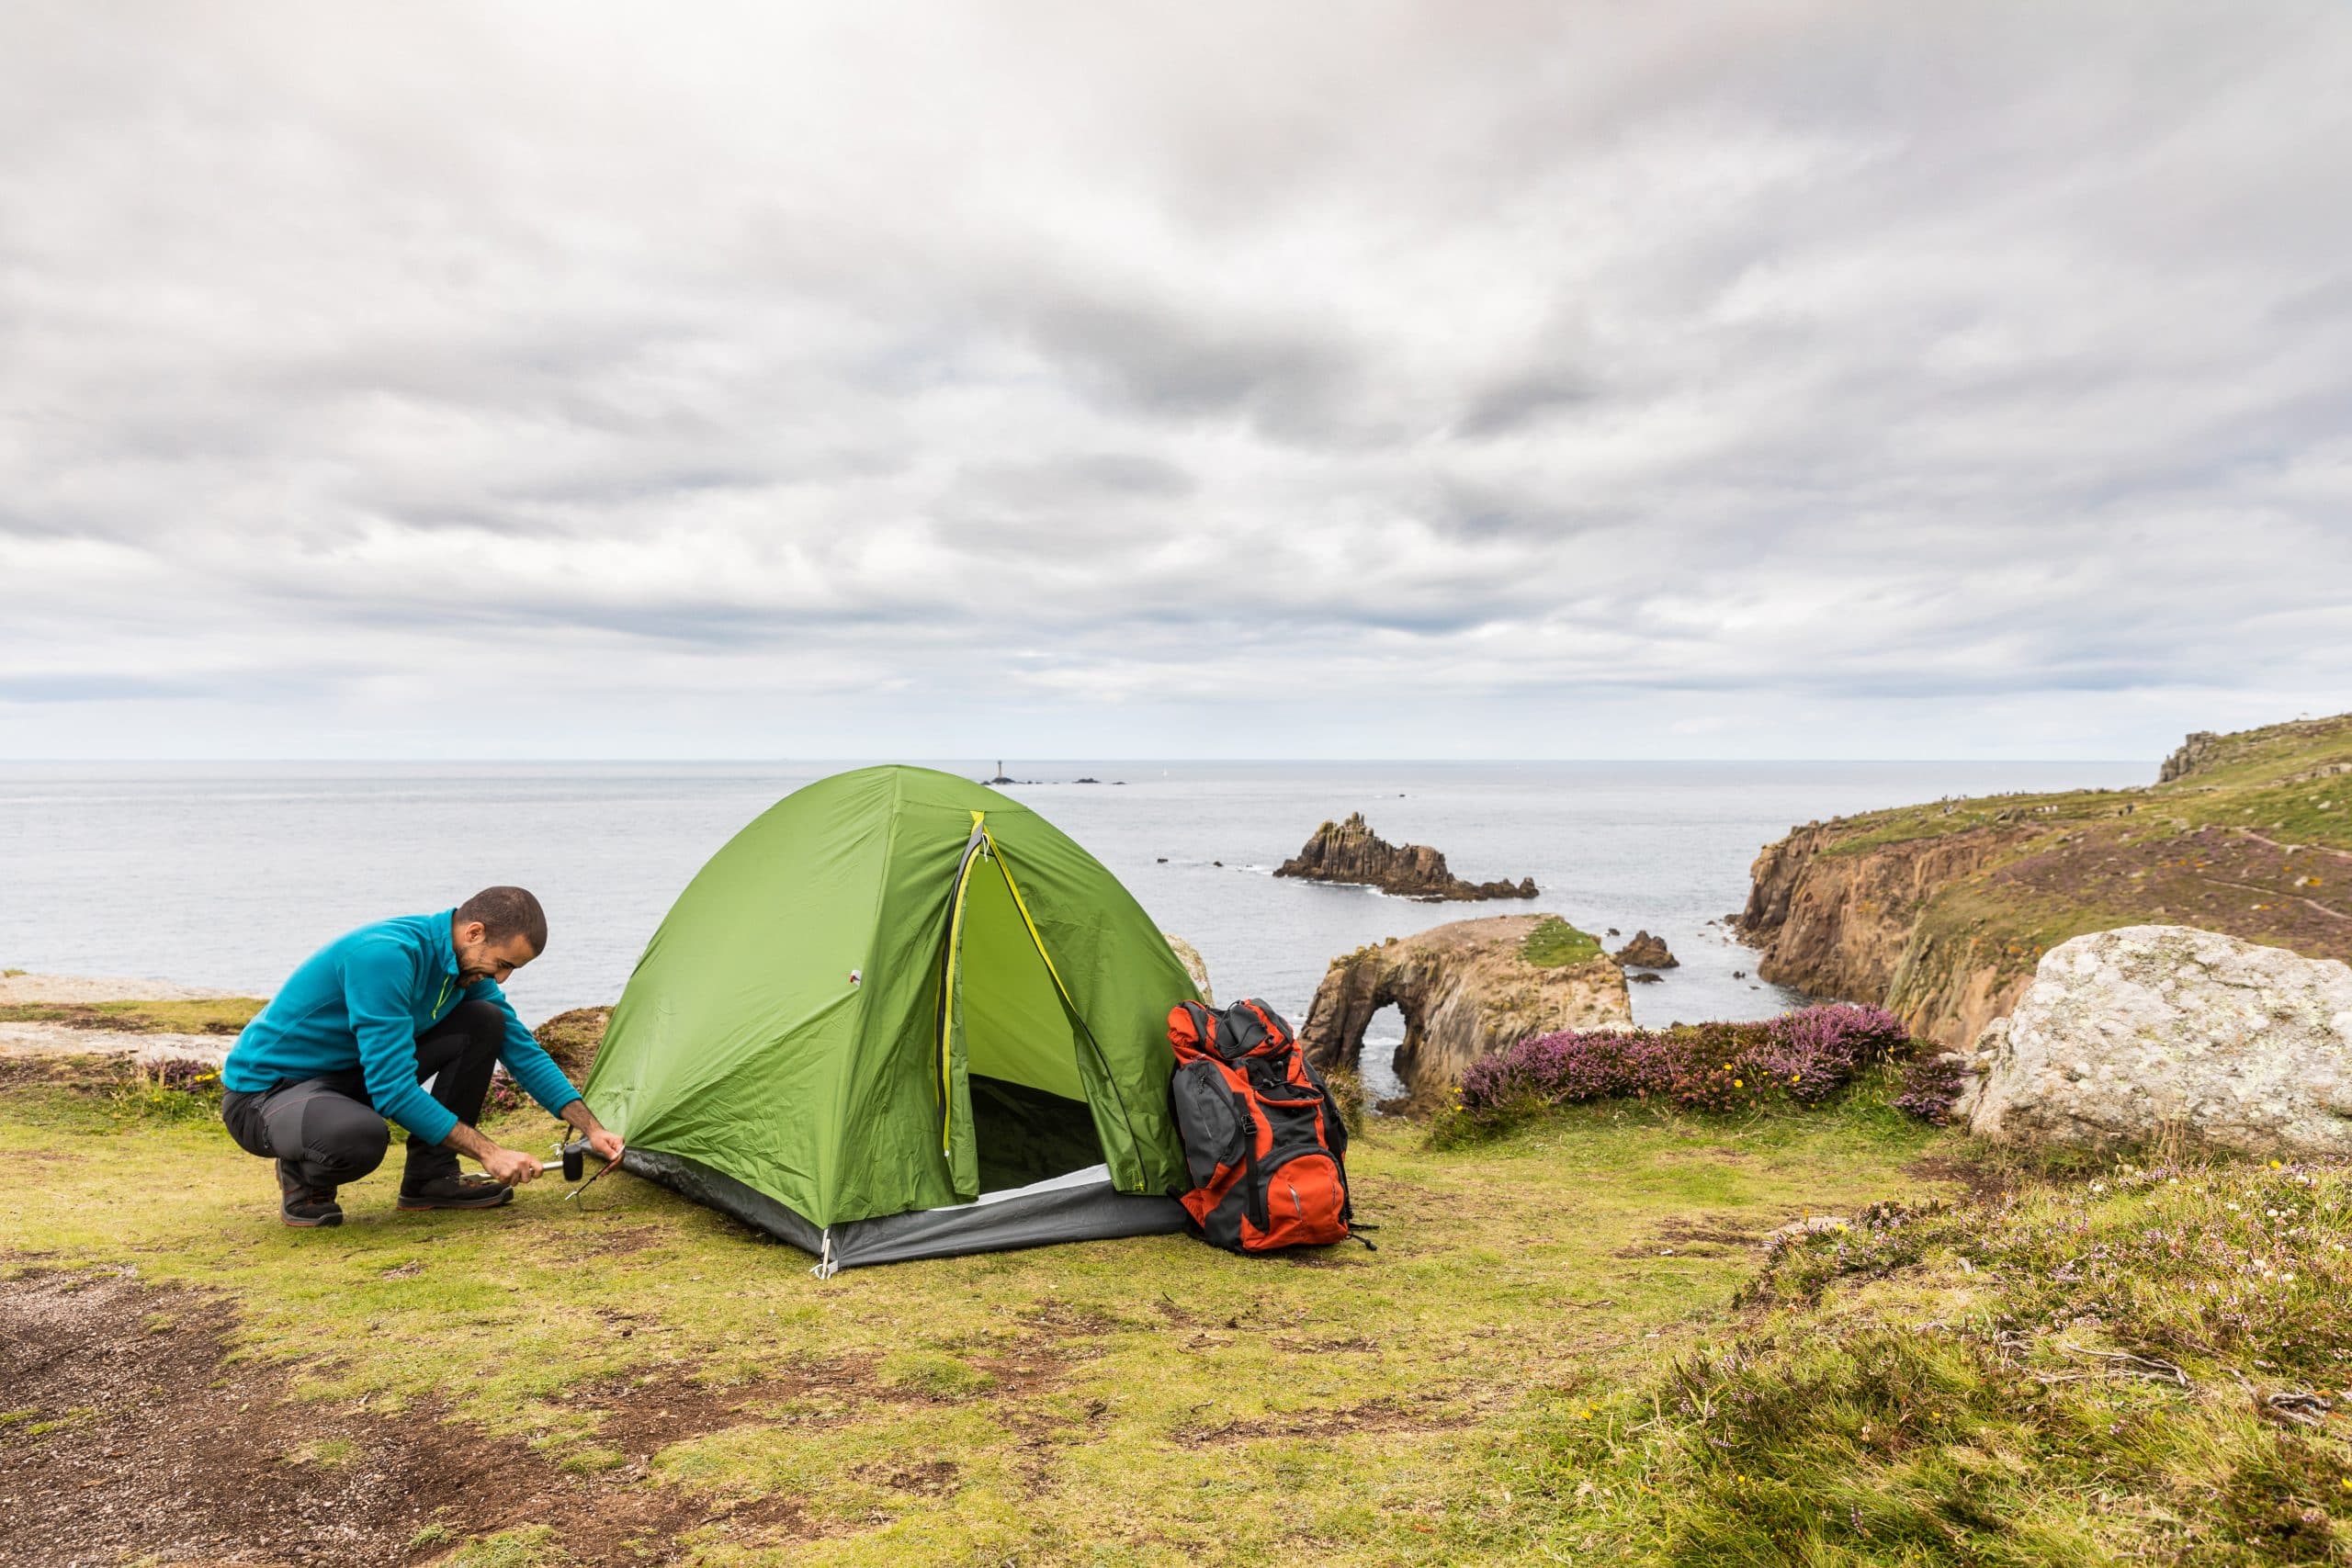 Want to go camping but don’t have the storage? Our Brighton storage will help. Image shows a green tent pitched on a cliff edge overlooking the sea with a man in a blue jumper securing the tent into the ground.